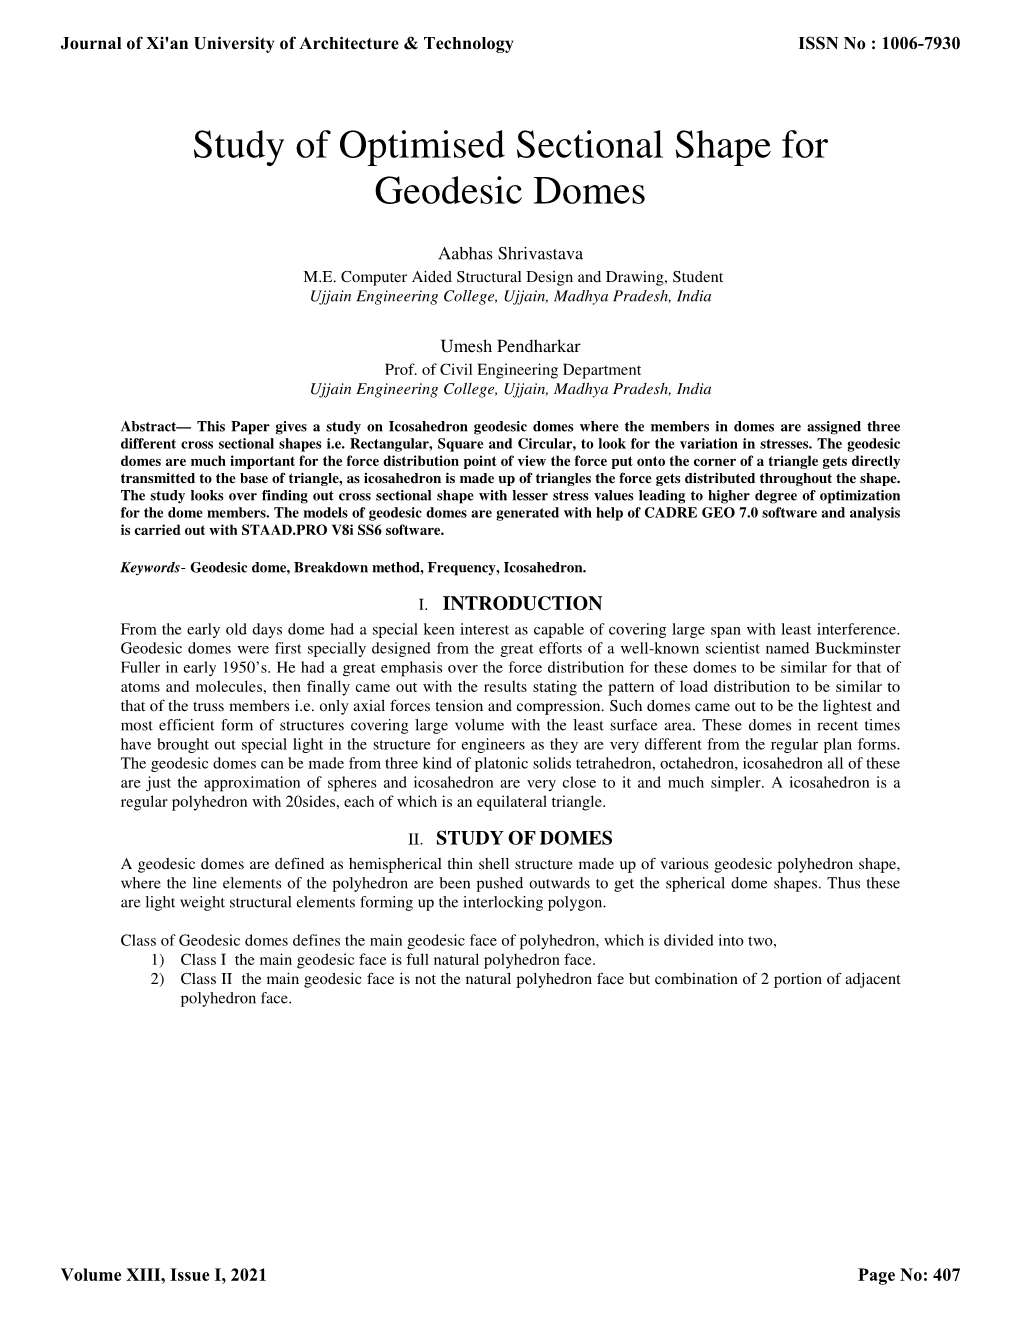 Study of Optimised Sectional Shape for Geodesic Domes